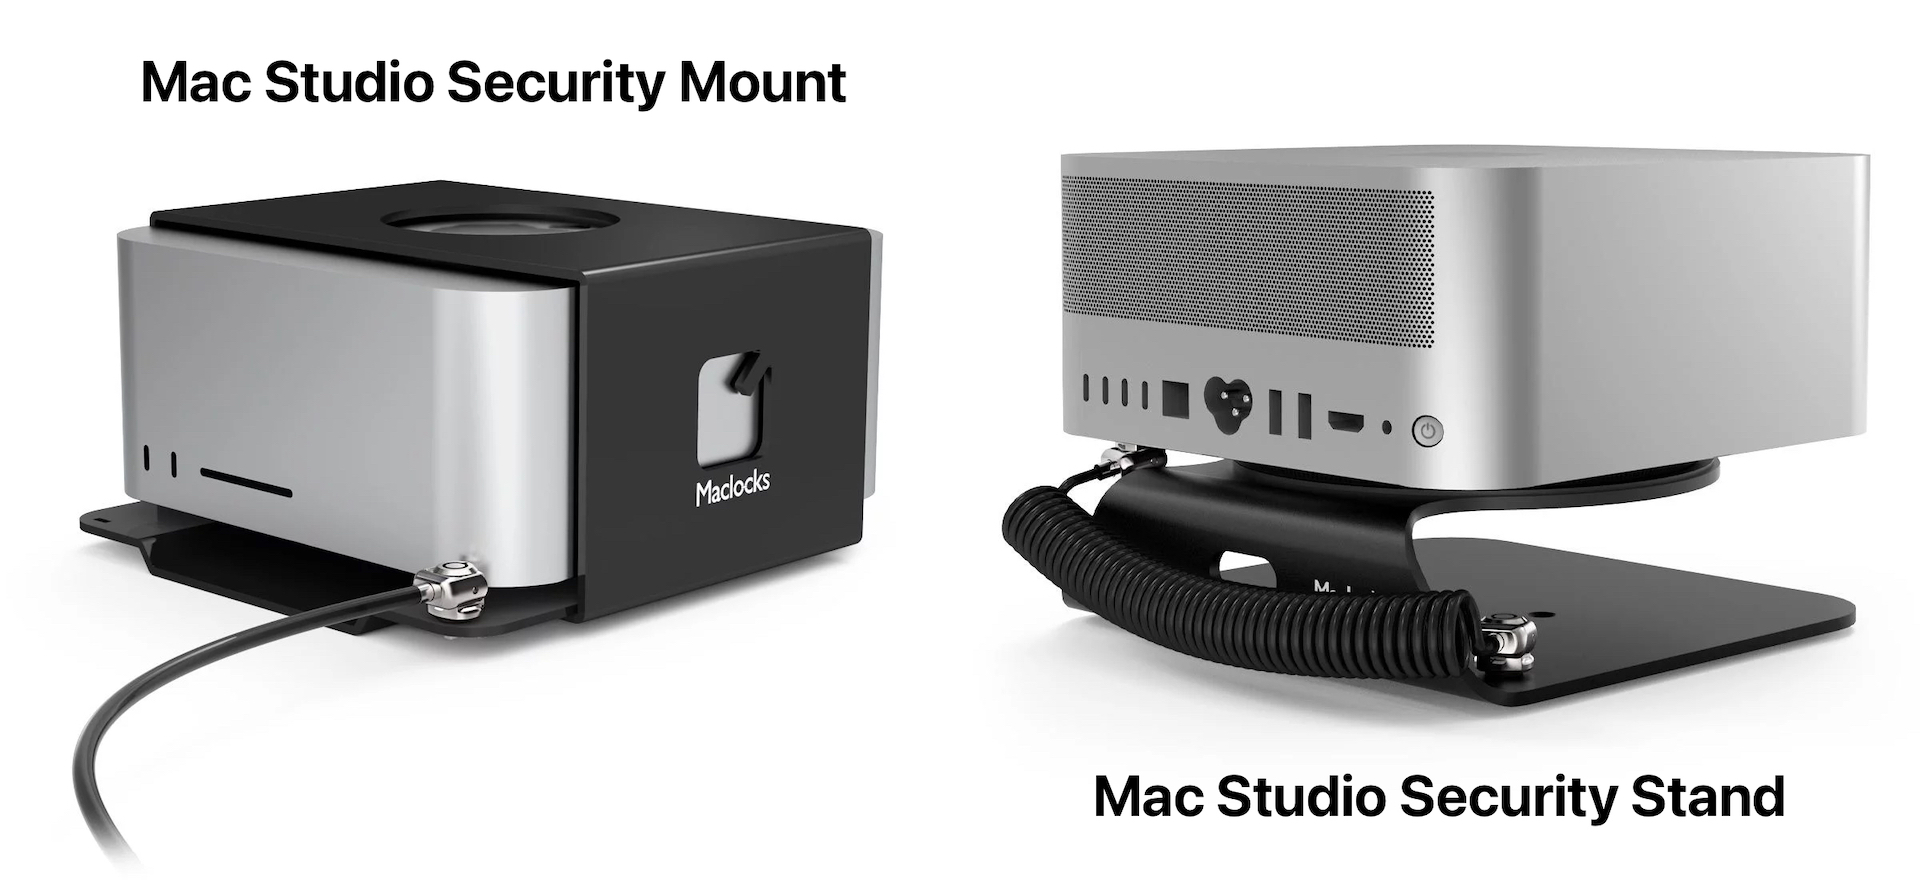 Mac Studio Security Mount and Stand